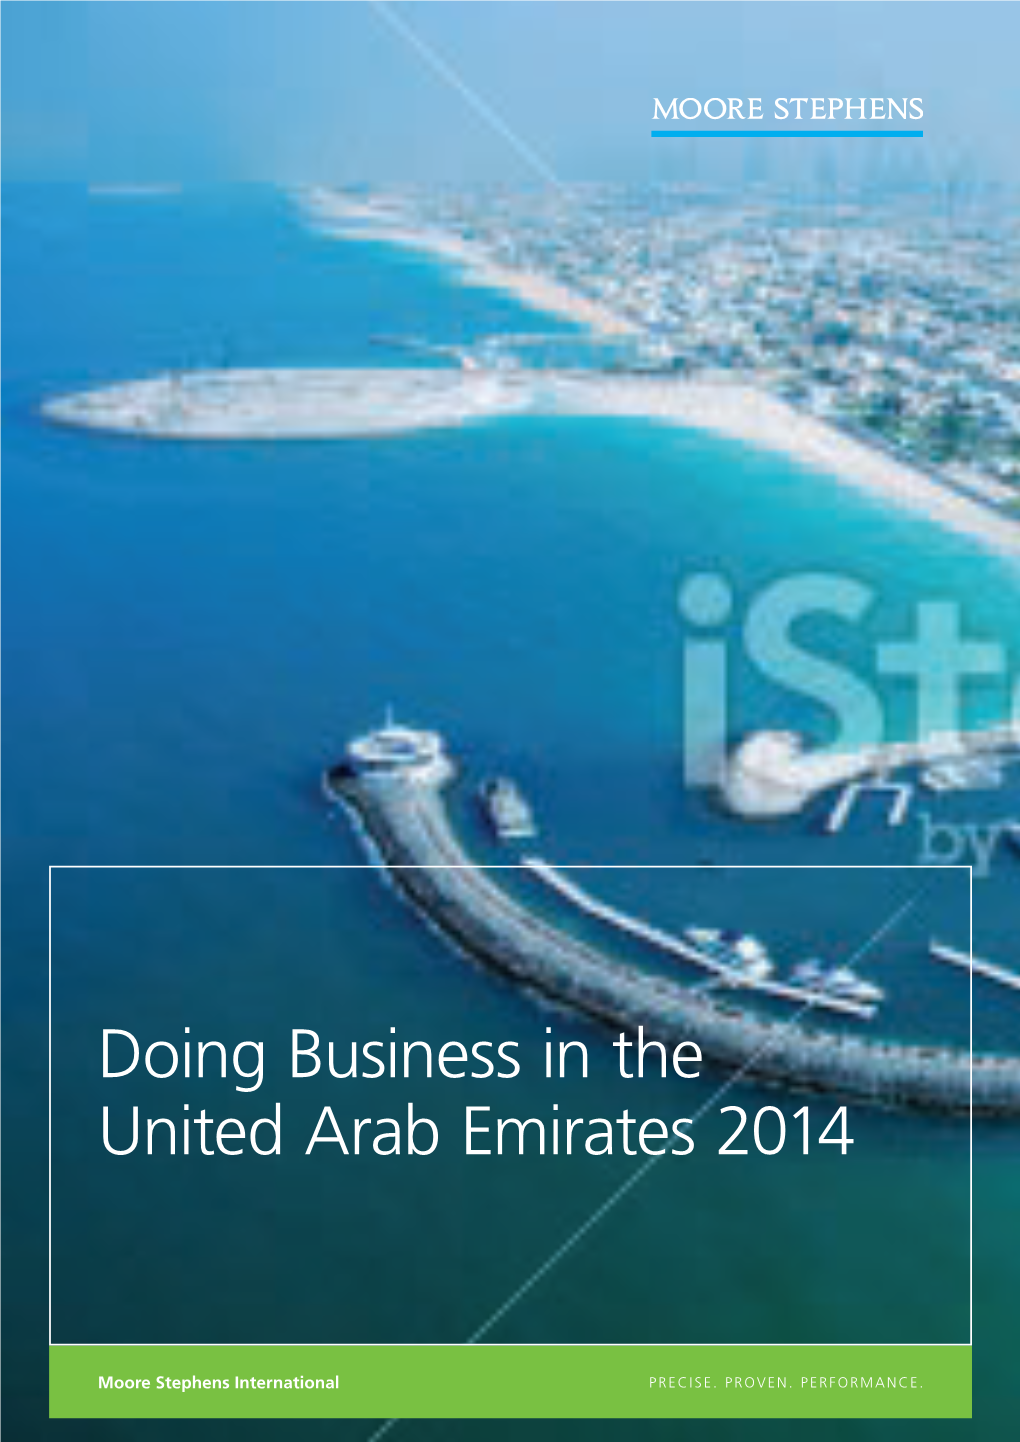 DPS27480 Doing Business in UAE 2014.Indd